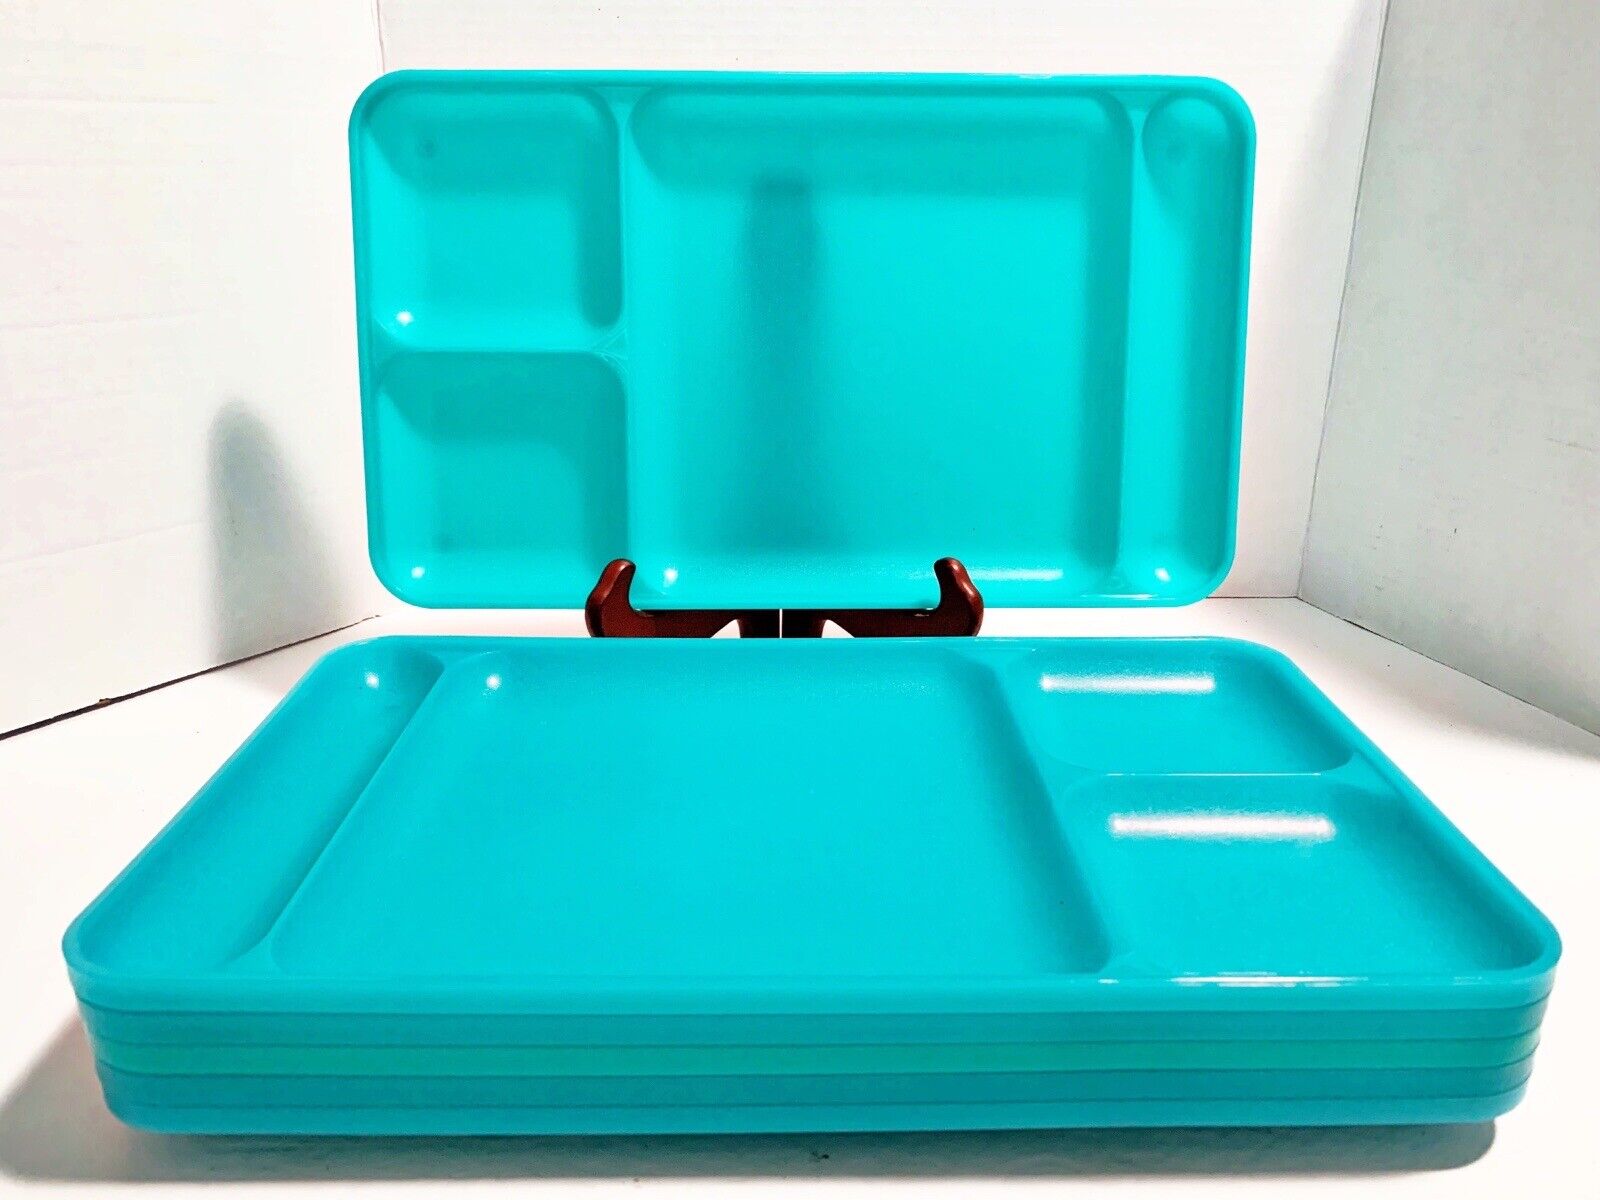 TUPPERWARE Turquoise Aqua Teal Section Divided Trays #1535 Cafeteria Set 6 Vtg